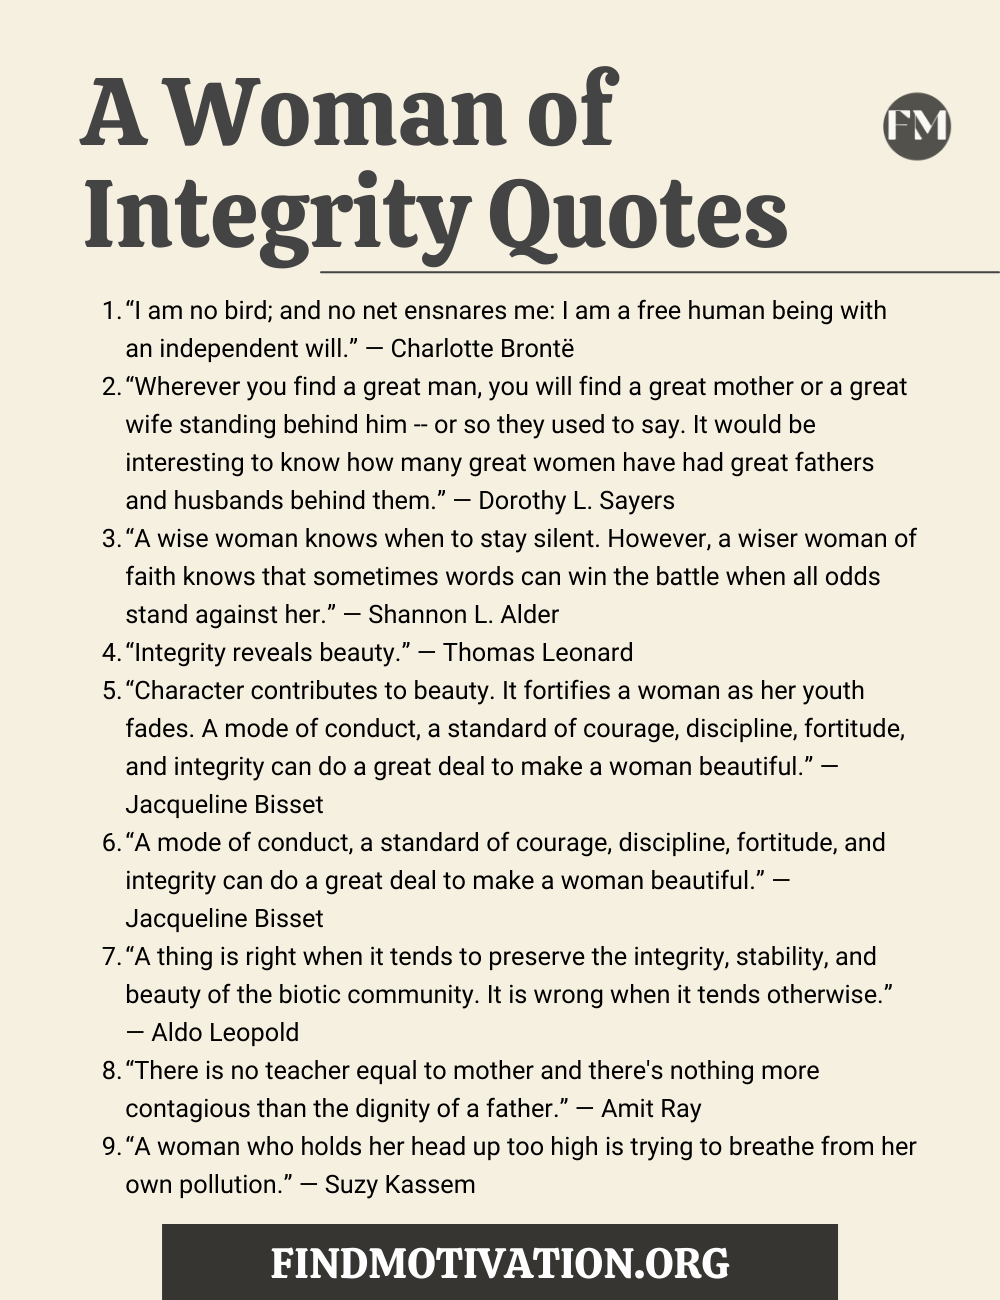 A Woman of Integrity Quotes